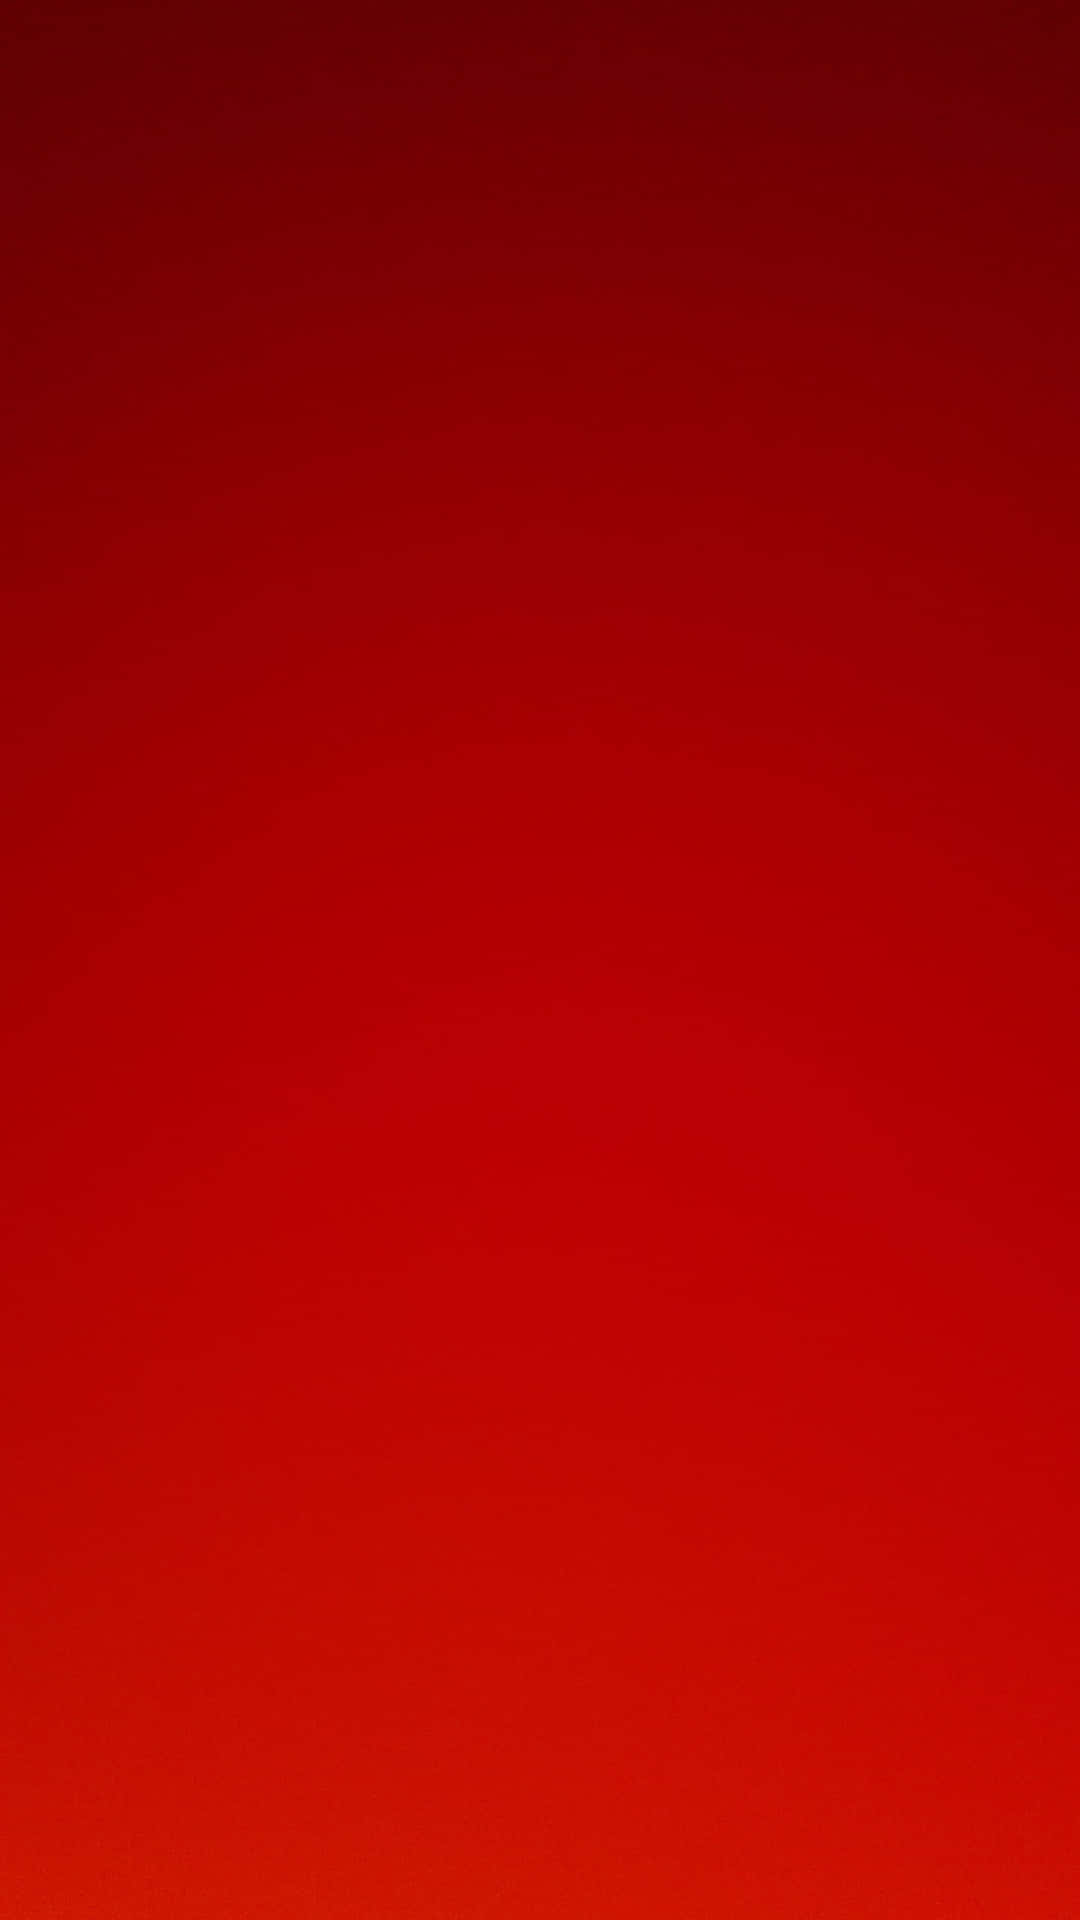 Solid Iphone Red Background